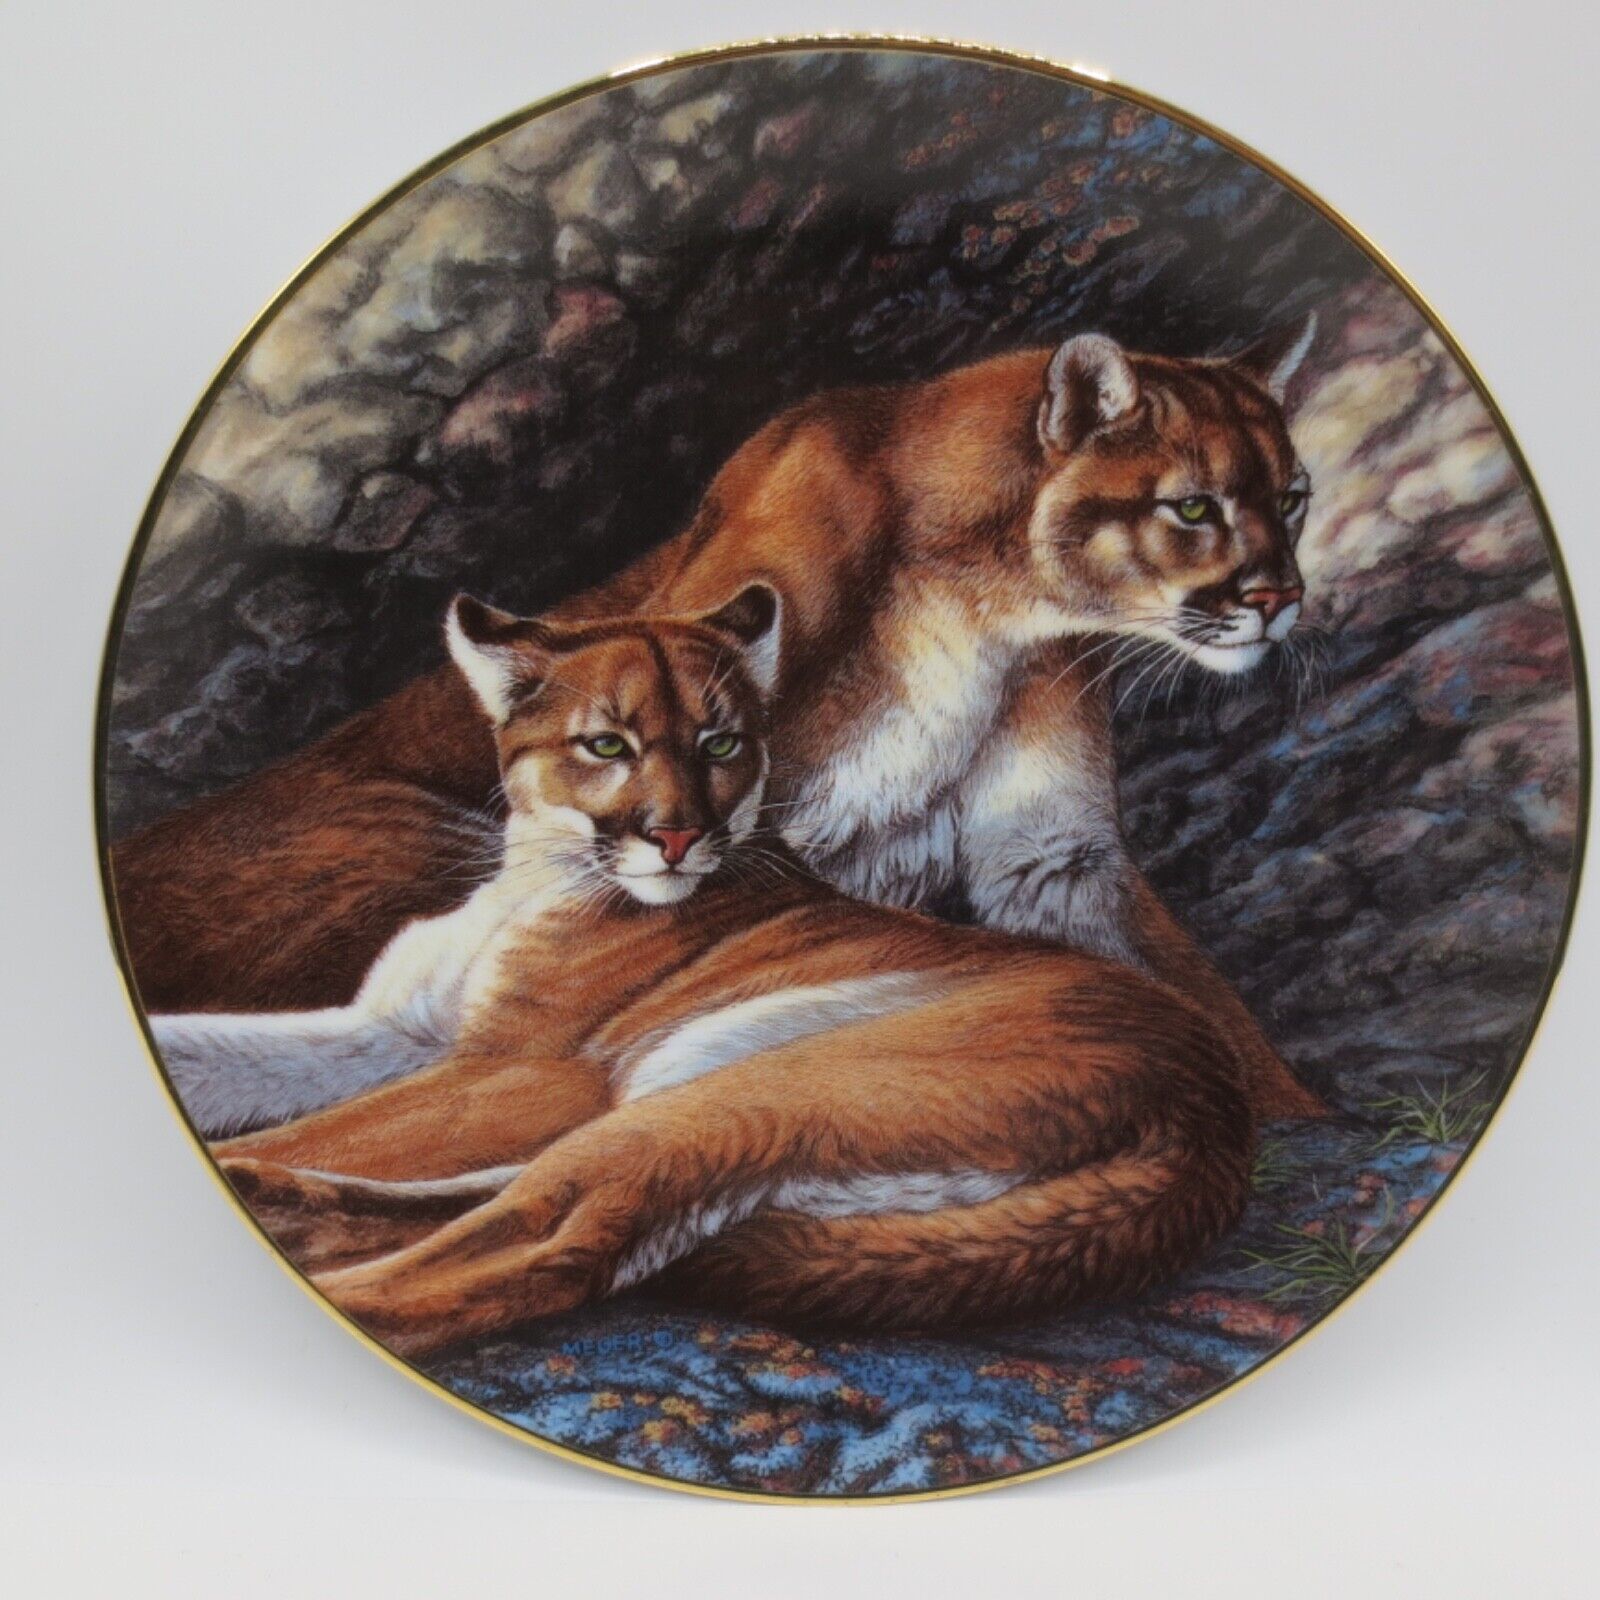 Devoted Protector Portraits of the Wild Hamilton Collection Plate 194 Cougars